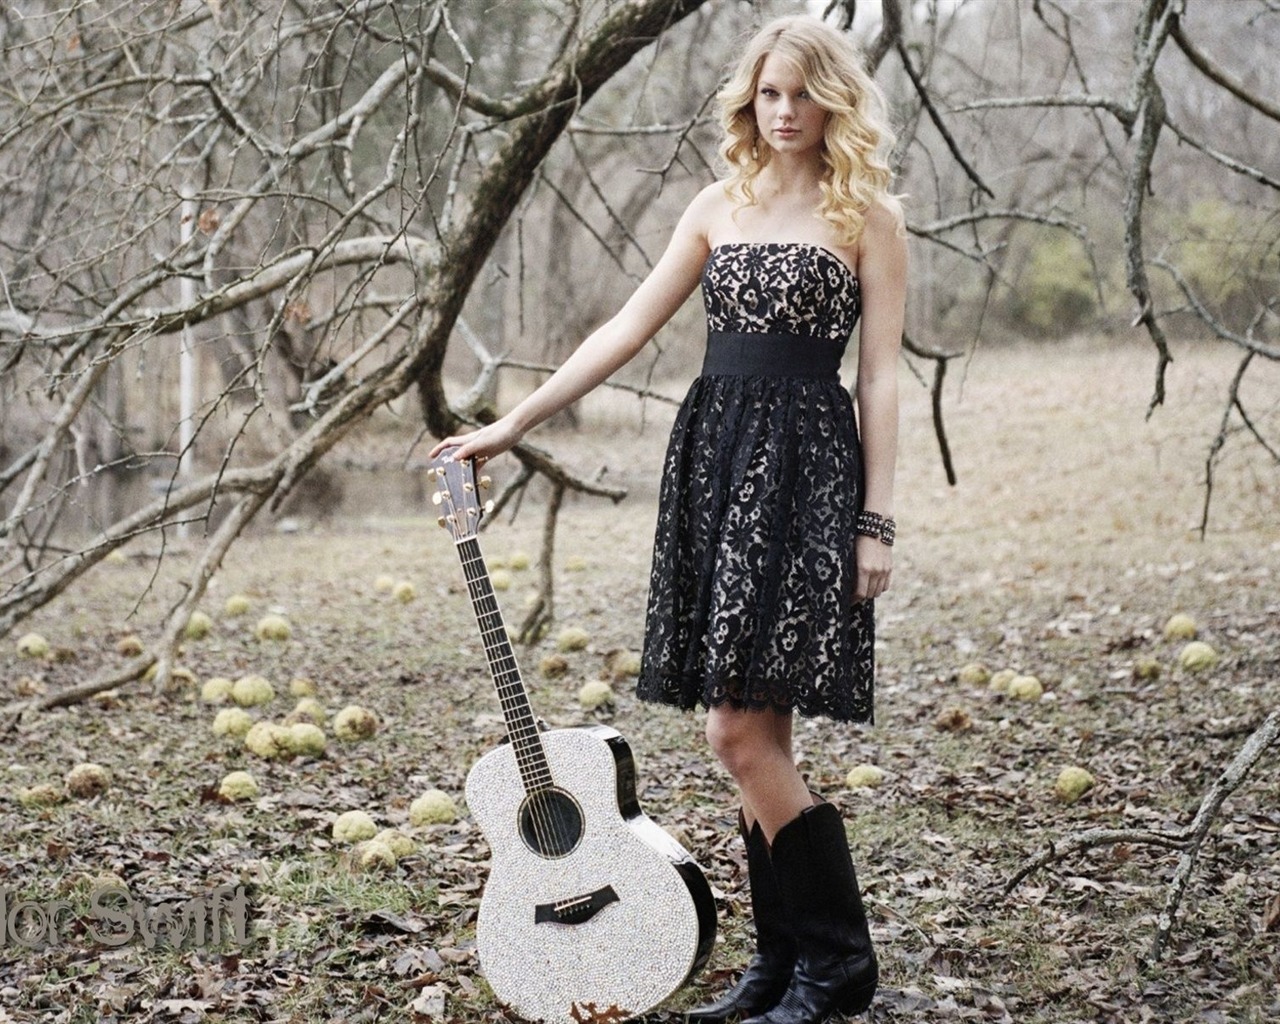 Taylor Swift #078 - 1280x1024 Wallpapers Pictures Photos Images